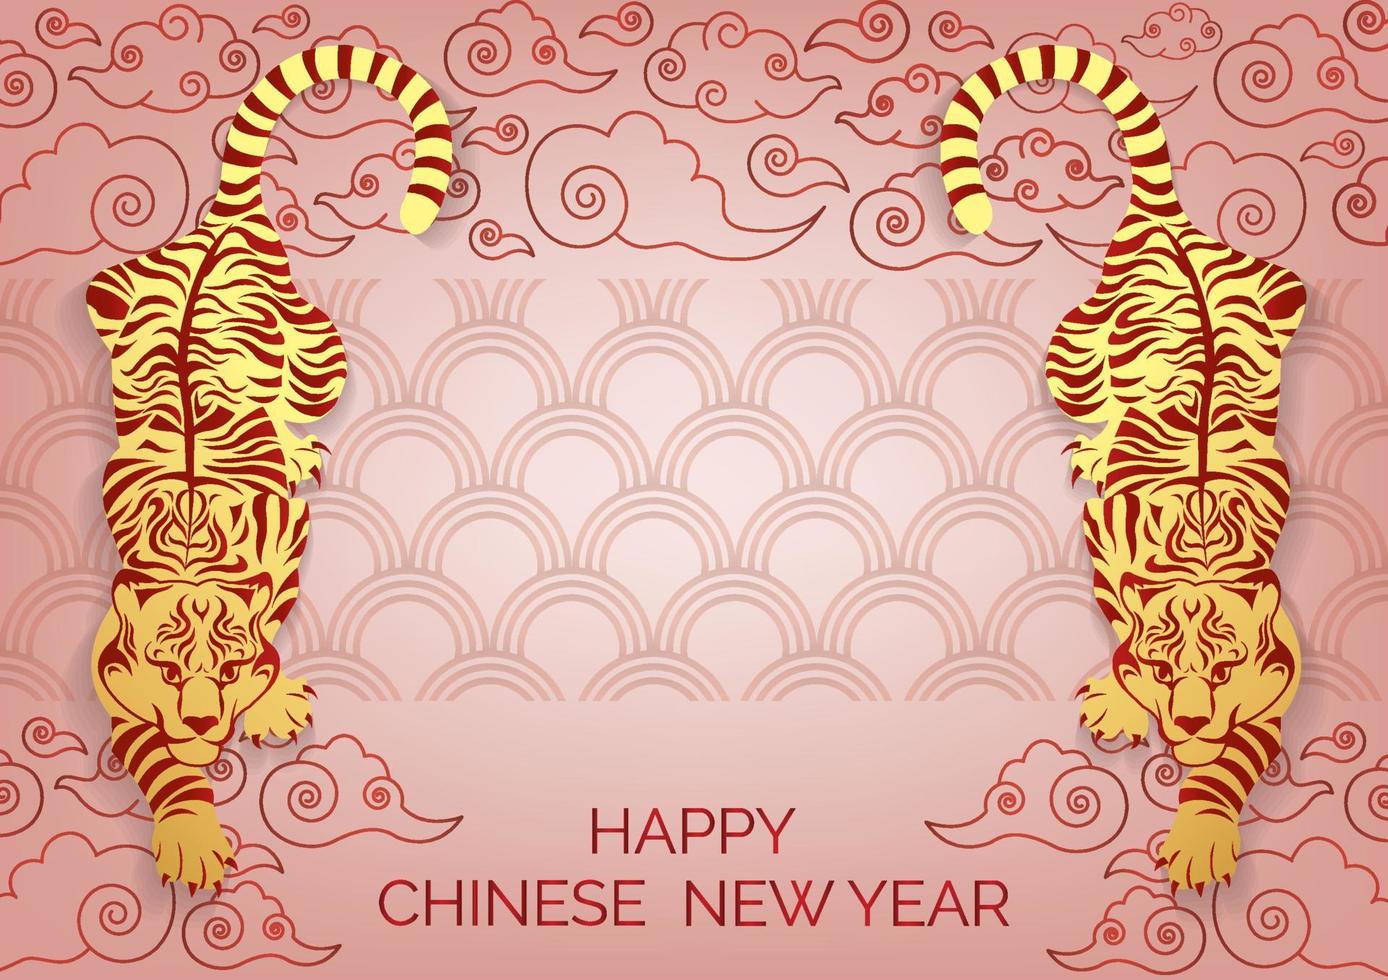 tiger year 2022 chinese new year banner art design vector